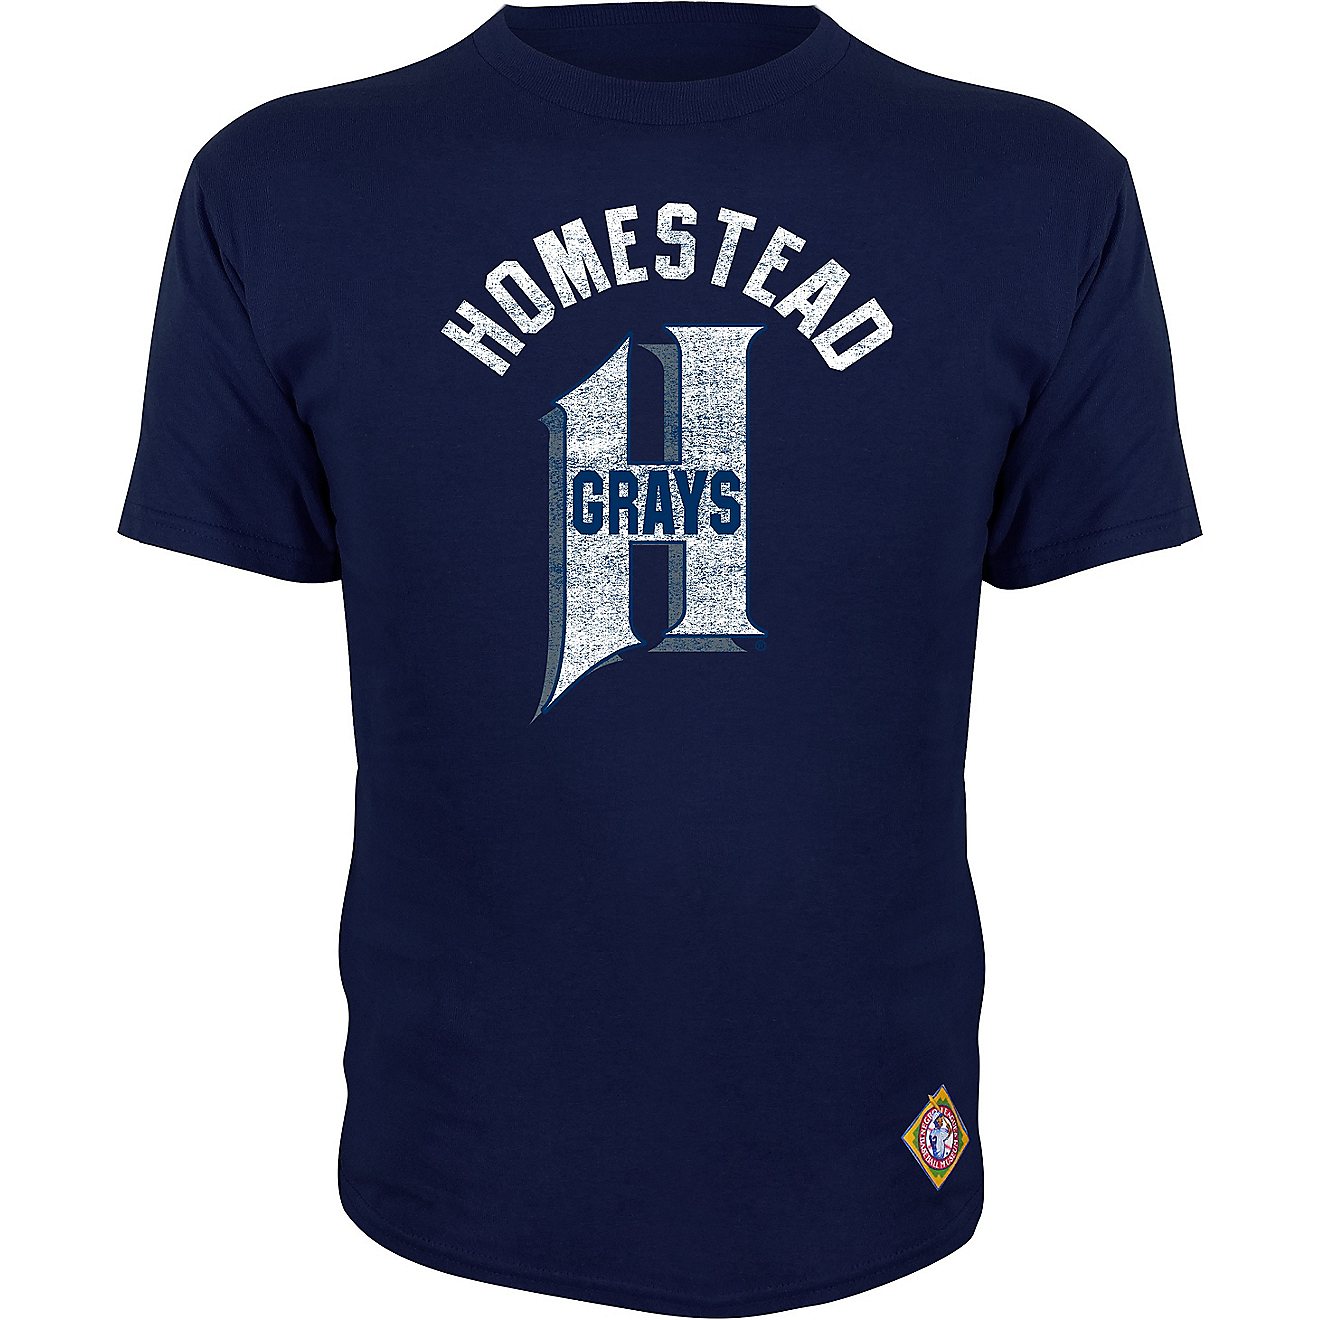 Stitches Men's Homestead Grays Logo Graphic Short Sleeve T-shirt                                                                 - view number 1